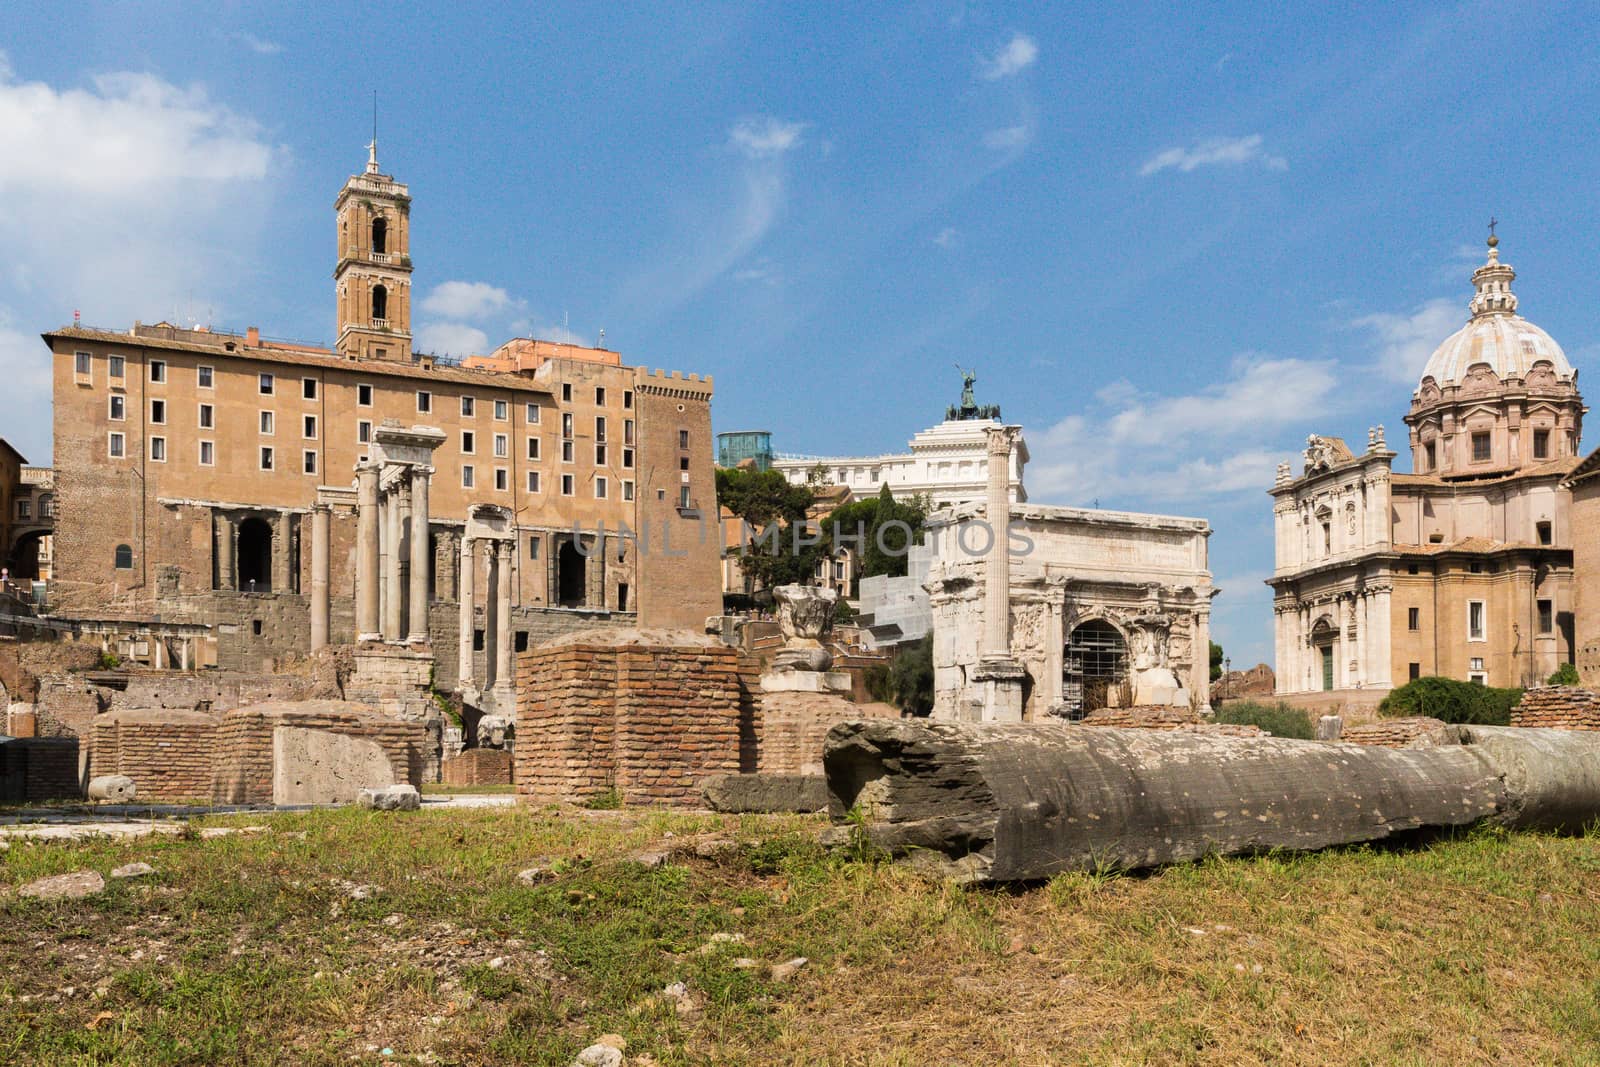 The Roman Forum is a rectangular forum surrounded by the ruins of several important ancient government buildings at the center of the city of Rome. Citizens of the ancient city referred to this space, originally a marketplace, as the Forum Magnum, or simply the Forum.

It was for centuries the center of Roman public life: the site of triumphal processions and elections; the venue for public speeches, criminal trials, and gladiatorial matches; and the nucleus of commercial affairs.